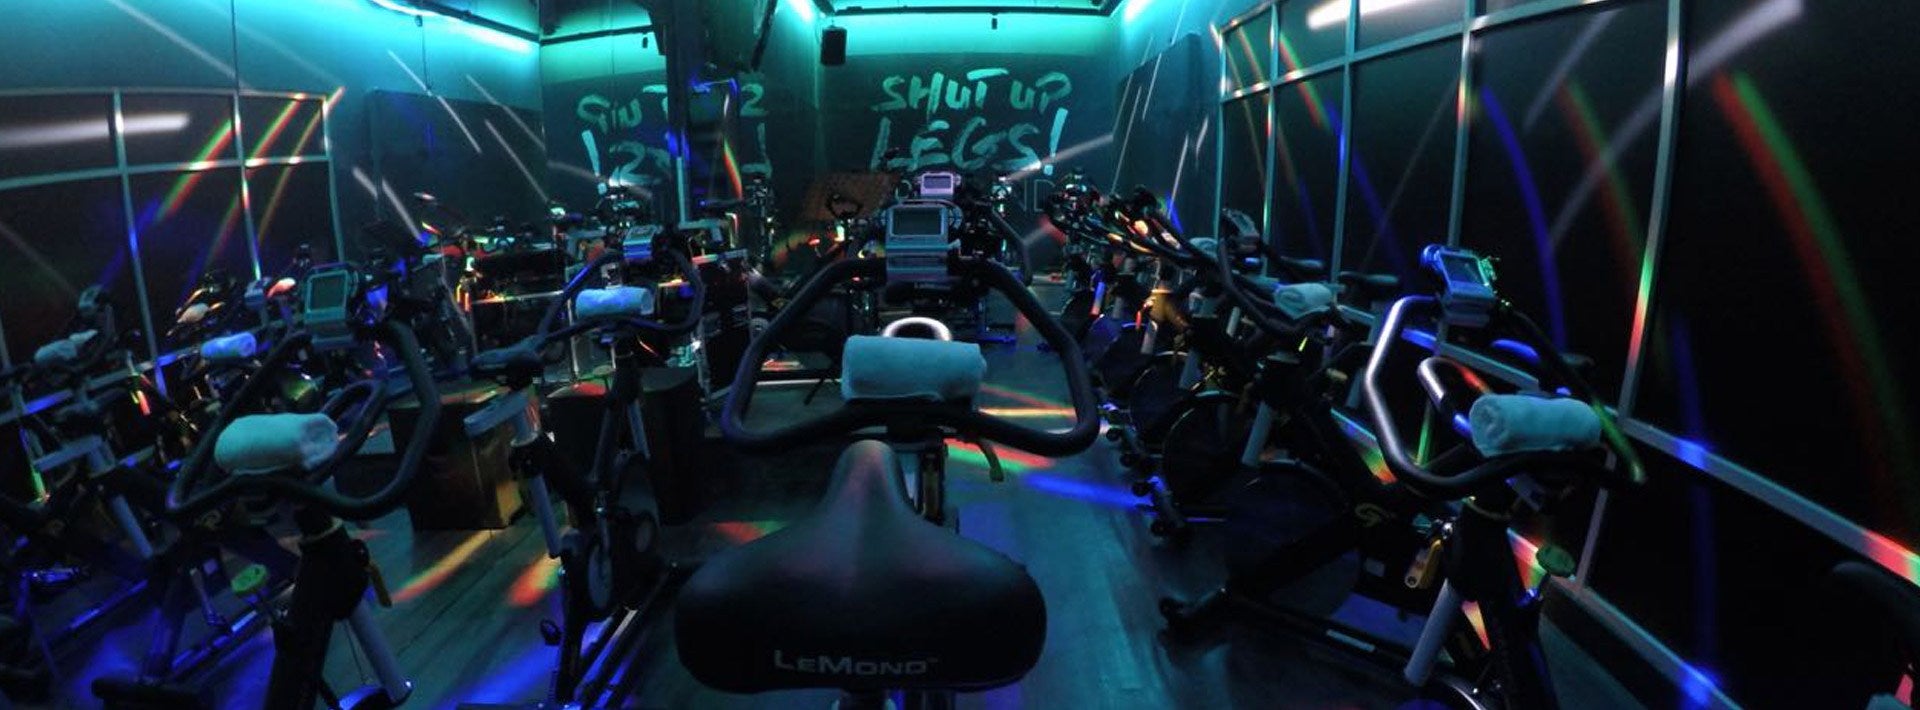 A New All-Access Fitness Pass like KFit is Coming to KL, Here's How it's Different - WORLD OF BUZZ 7